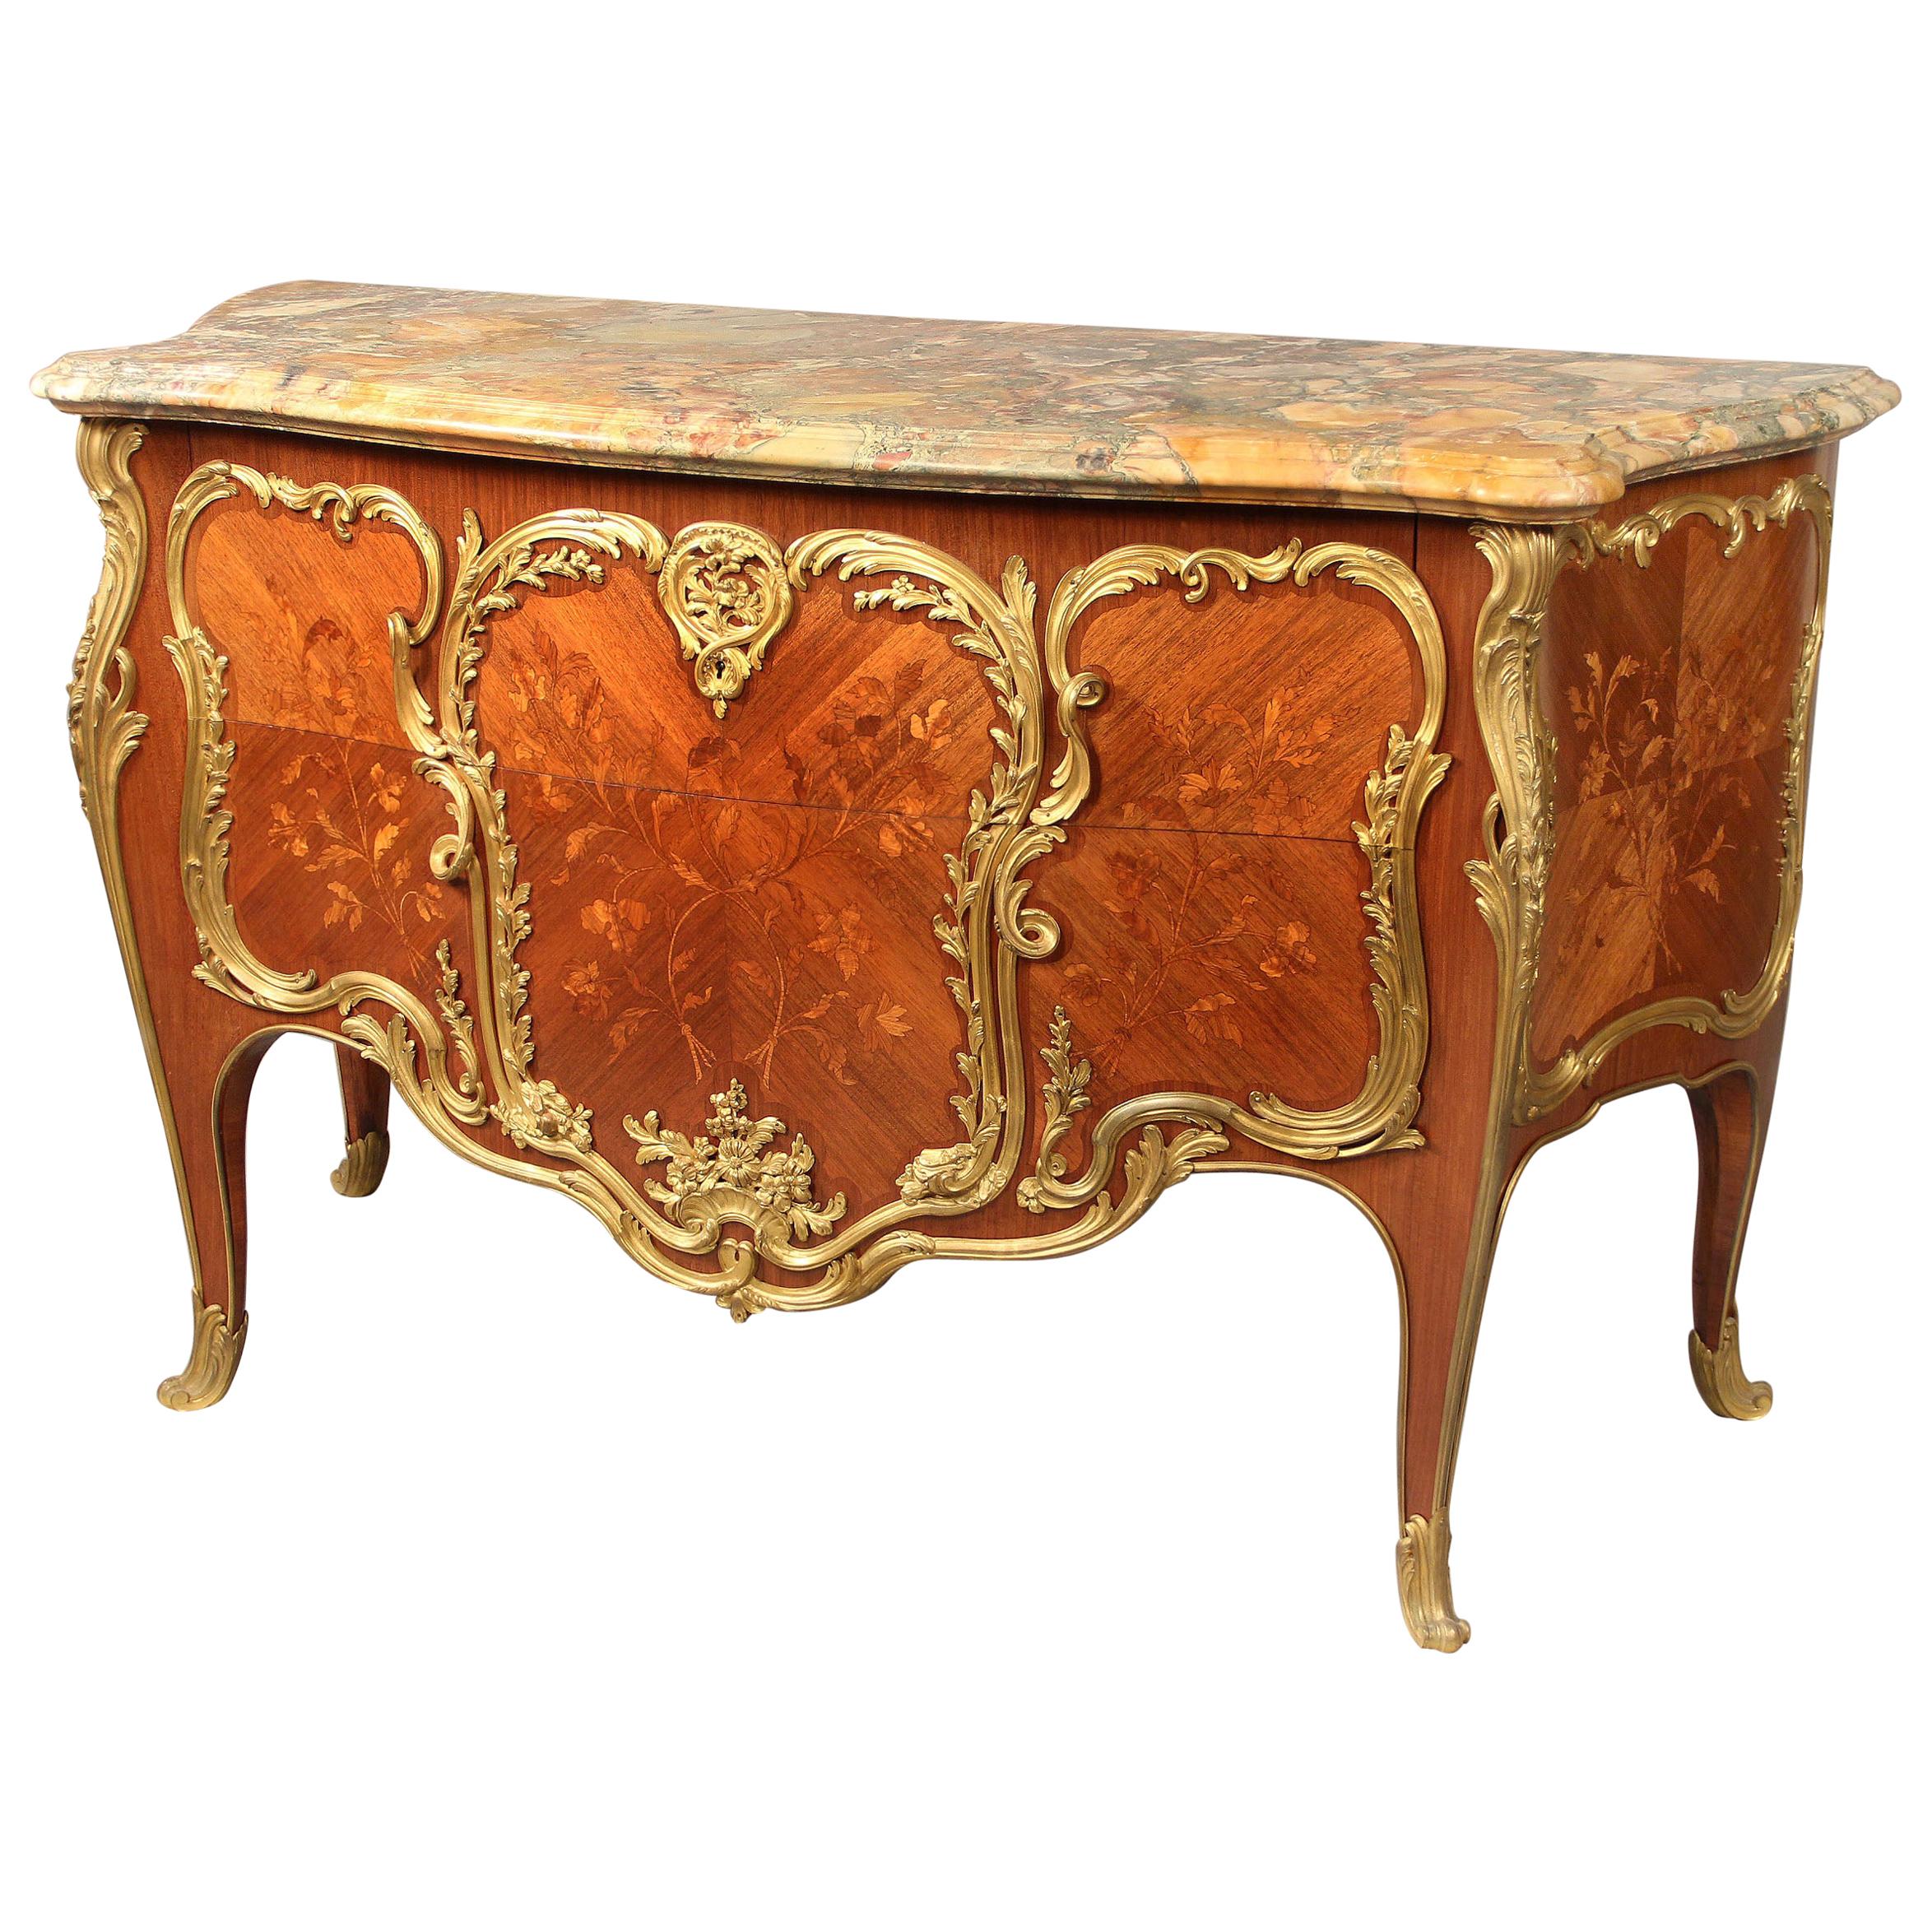 Important Late 19th Century Gilt Bronze Mounted Marquetry Commode by Krieger